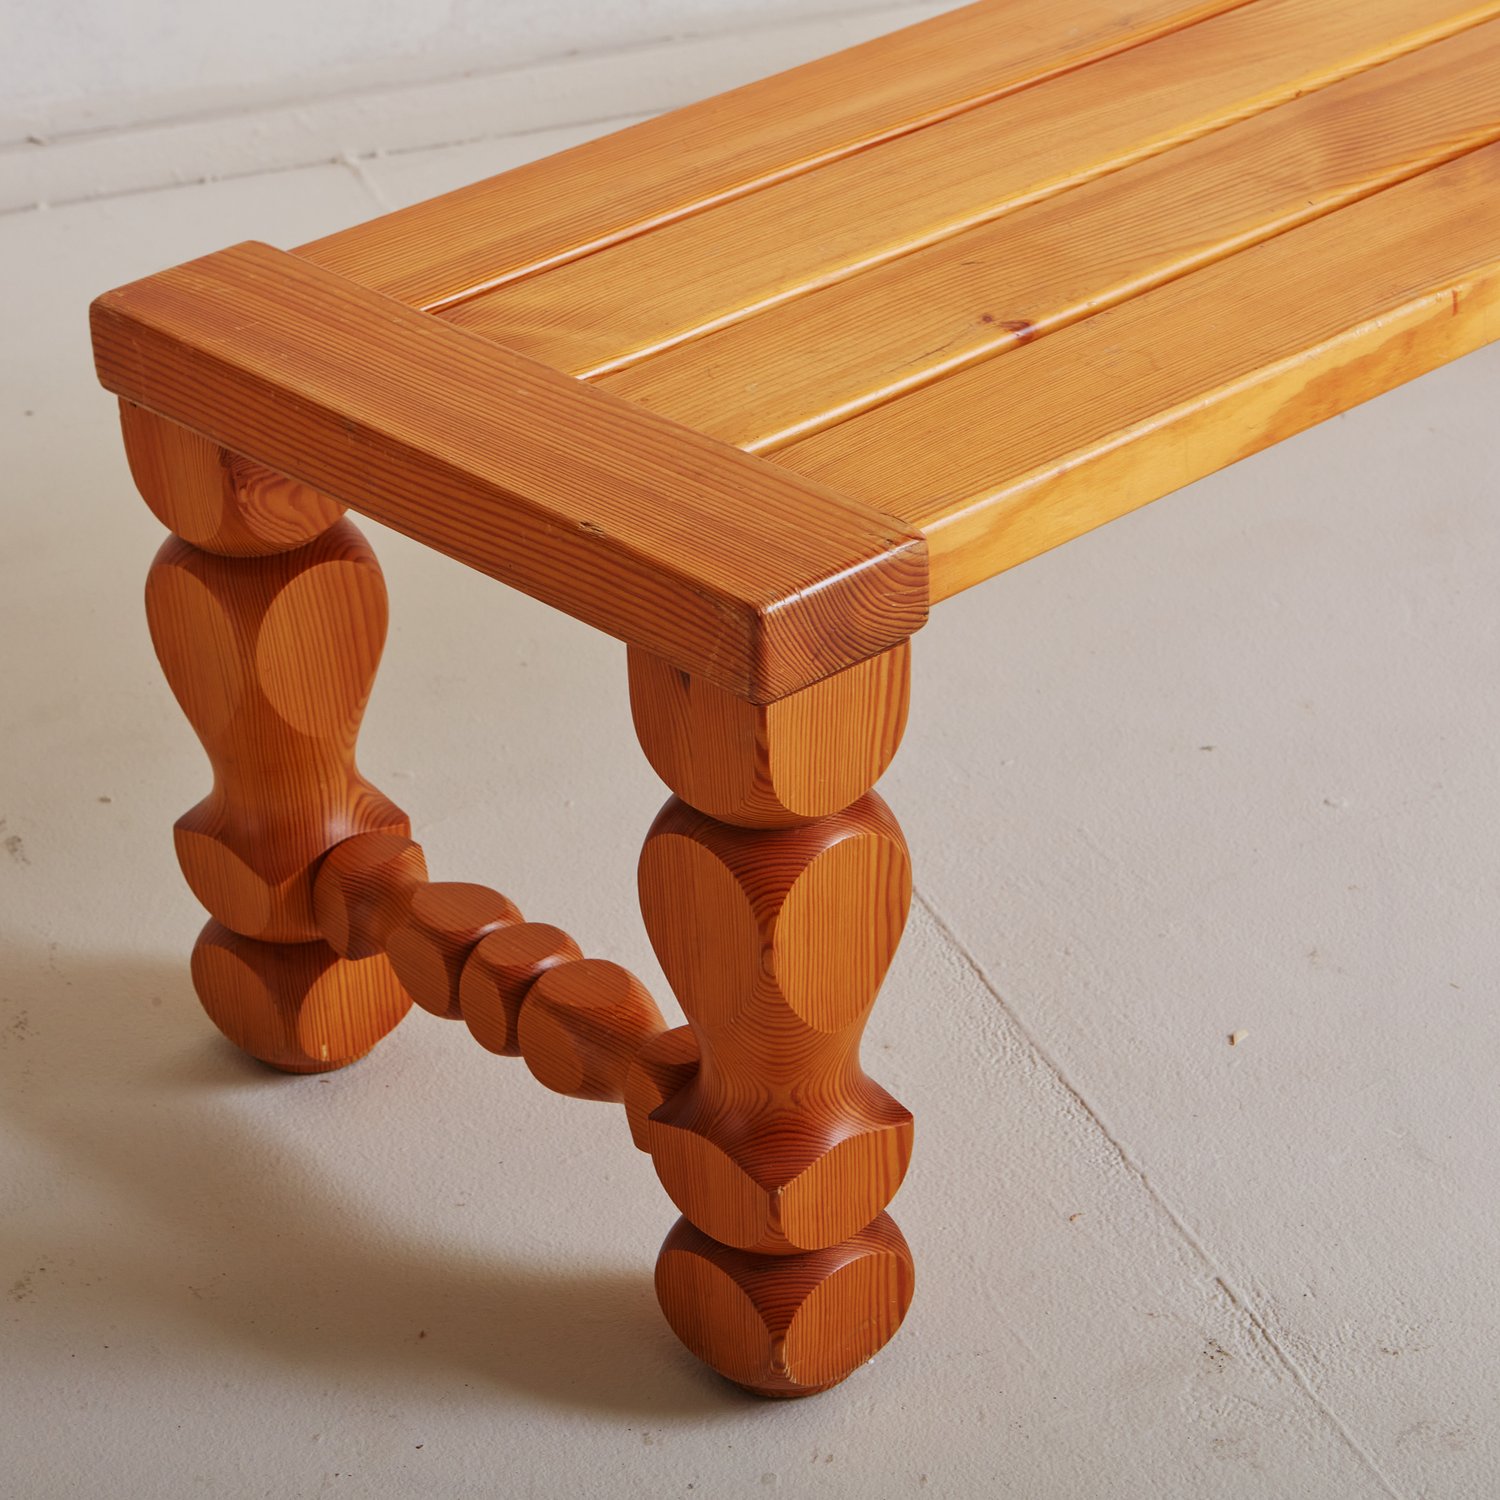 Geometric Carved Wooden Bench